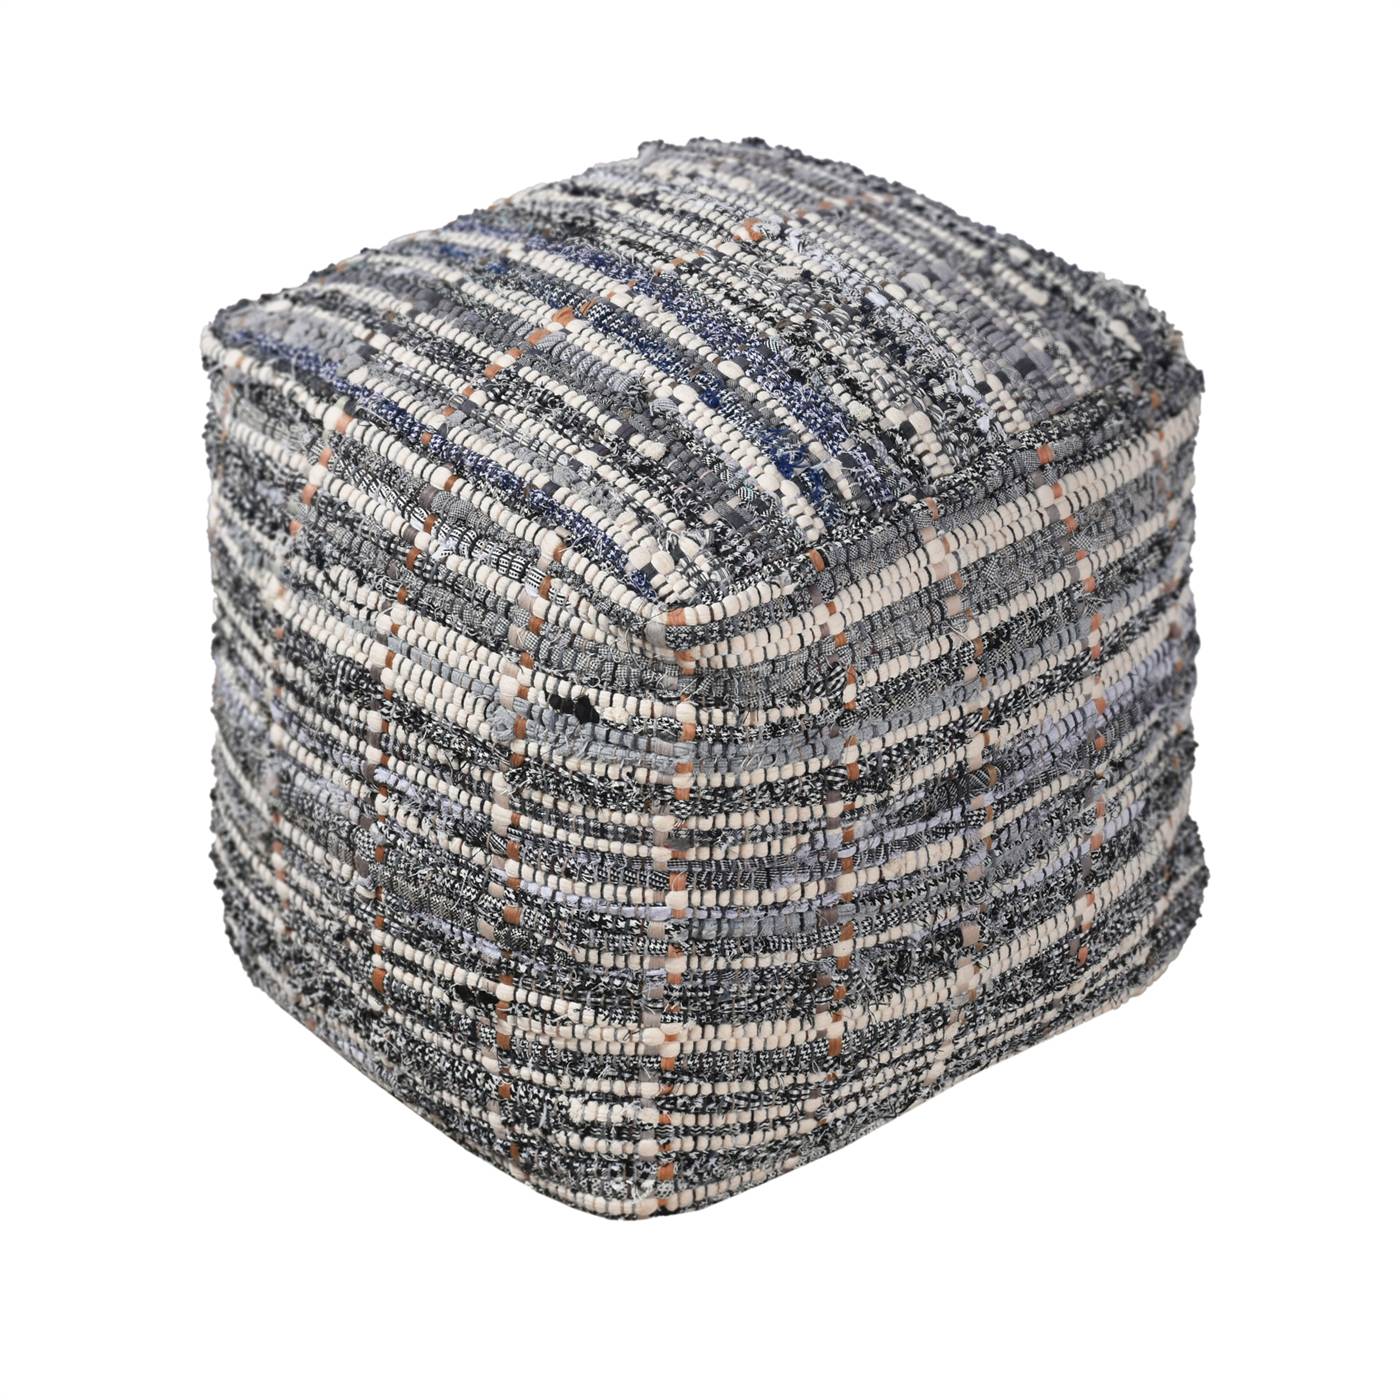 Kherson Pouf, 40x40x40 cm, Natural White, Blue, Charcoal, Cotton, Recycled Fabric, Hand Woven, Pitloom, Flat Weave